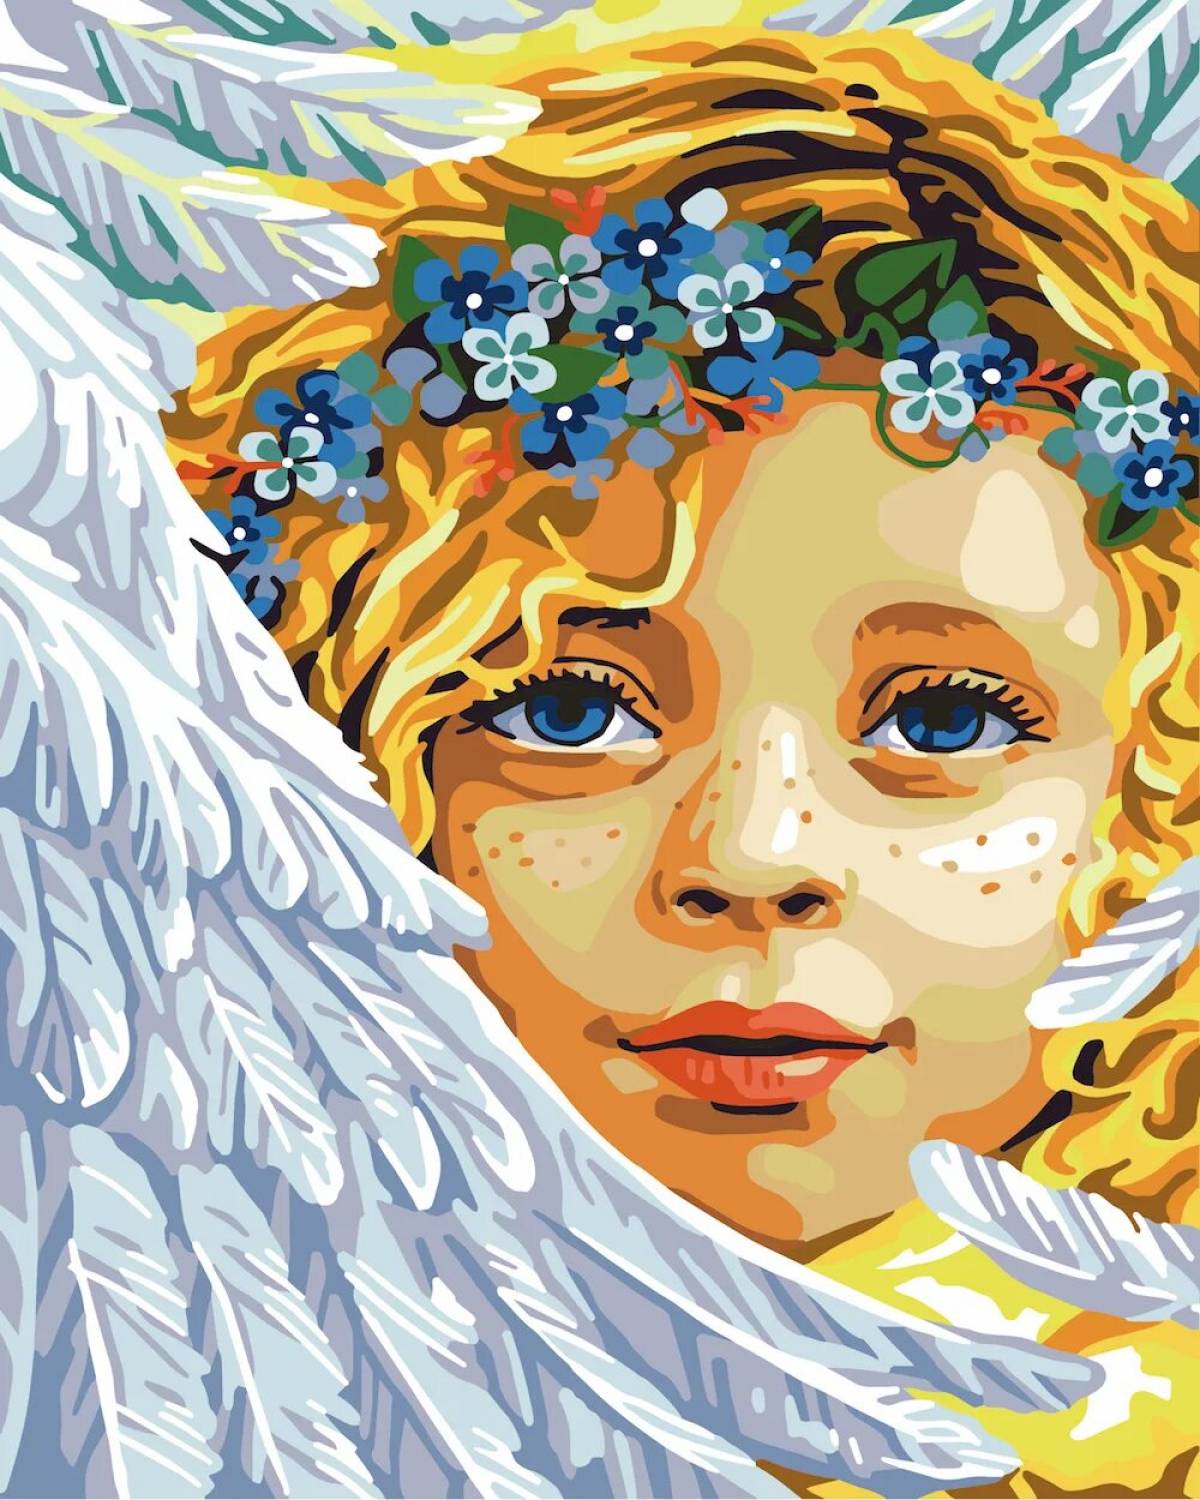 Angel by numbers #2